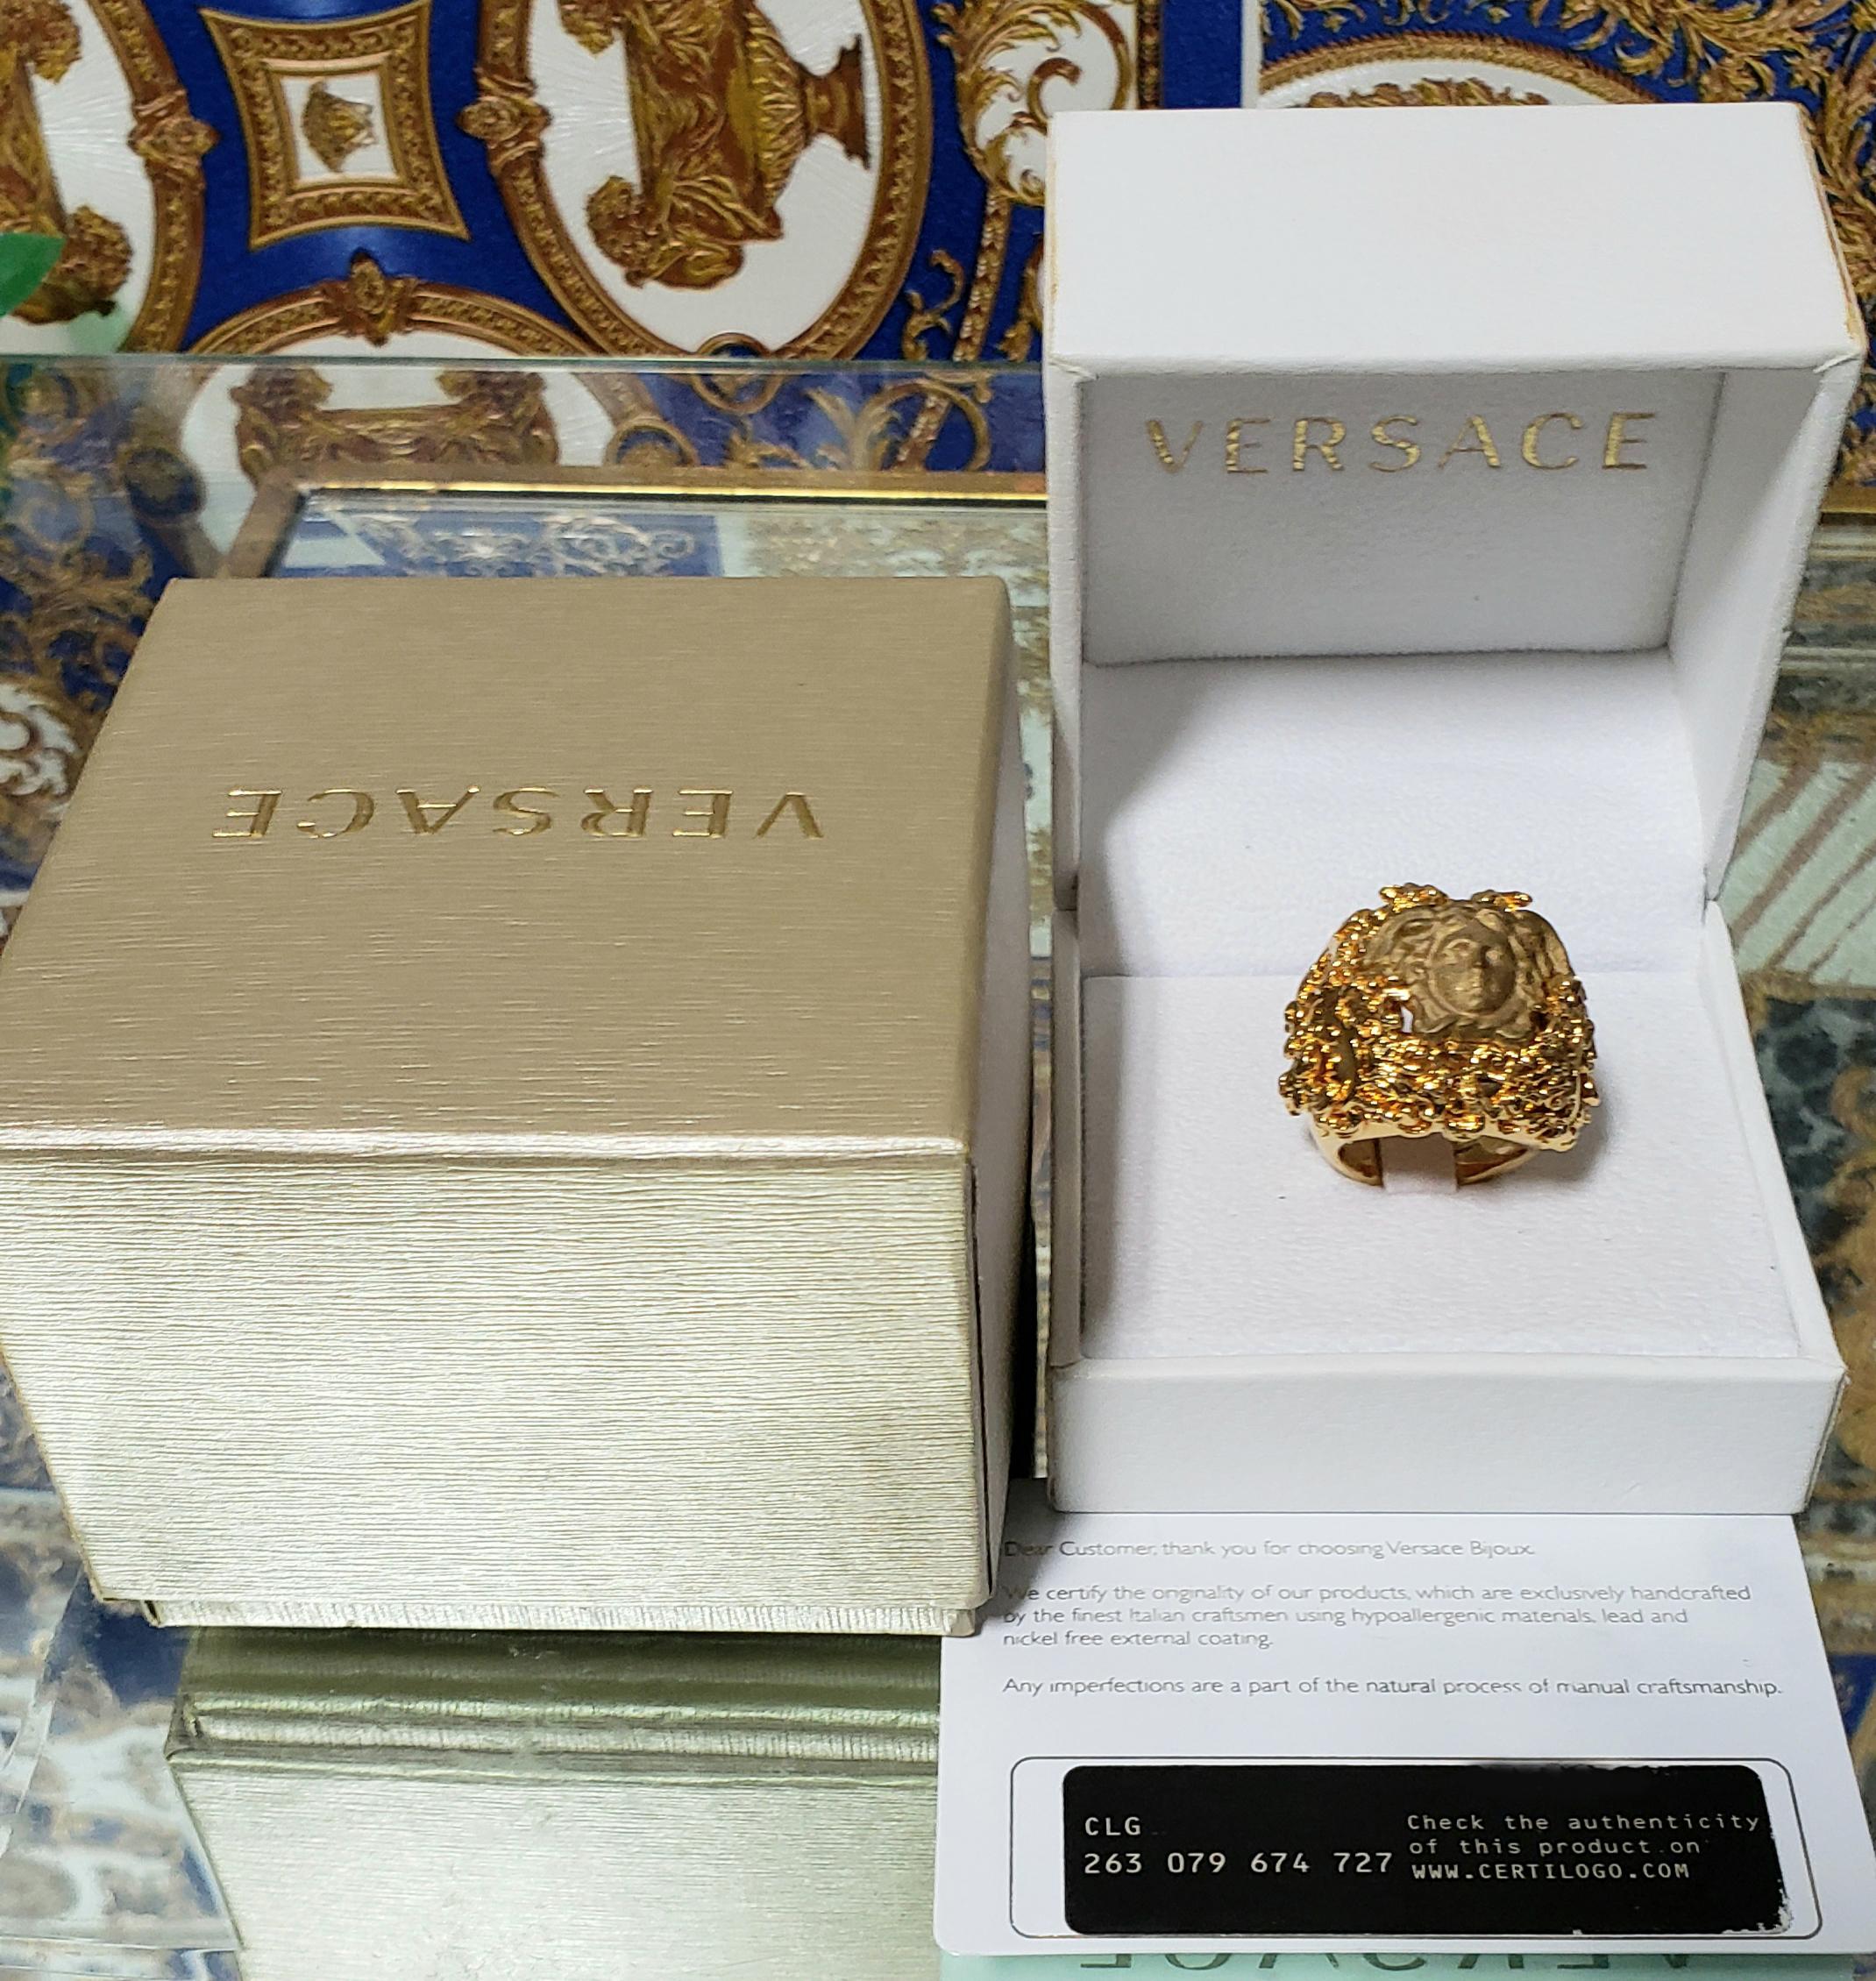 VERSACE




24K Gold Plated Medusa Ring

Baroque pattern



Made in Italy


Brand new. Display model, got minor scratches.

100% authentic guarantee. Comes with Versace box.

       PLEASE VISIT OUR STORE FOR MORE GREAT ITEM